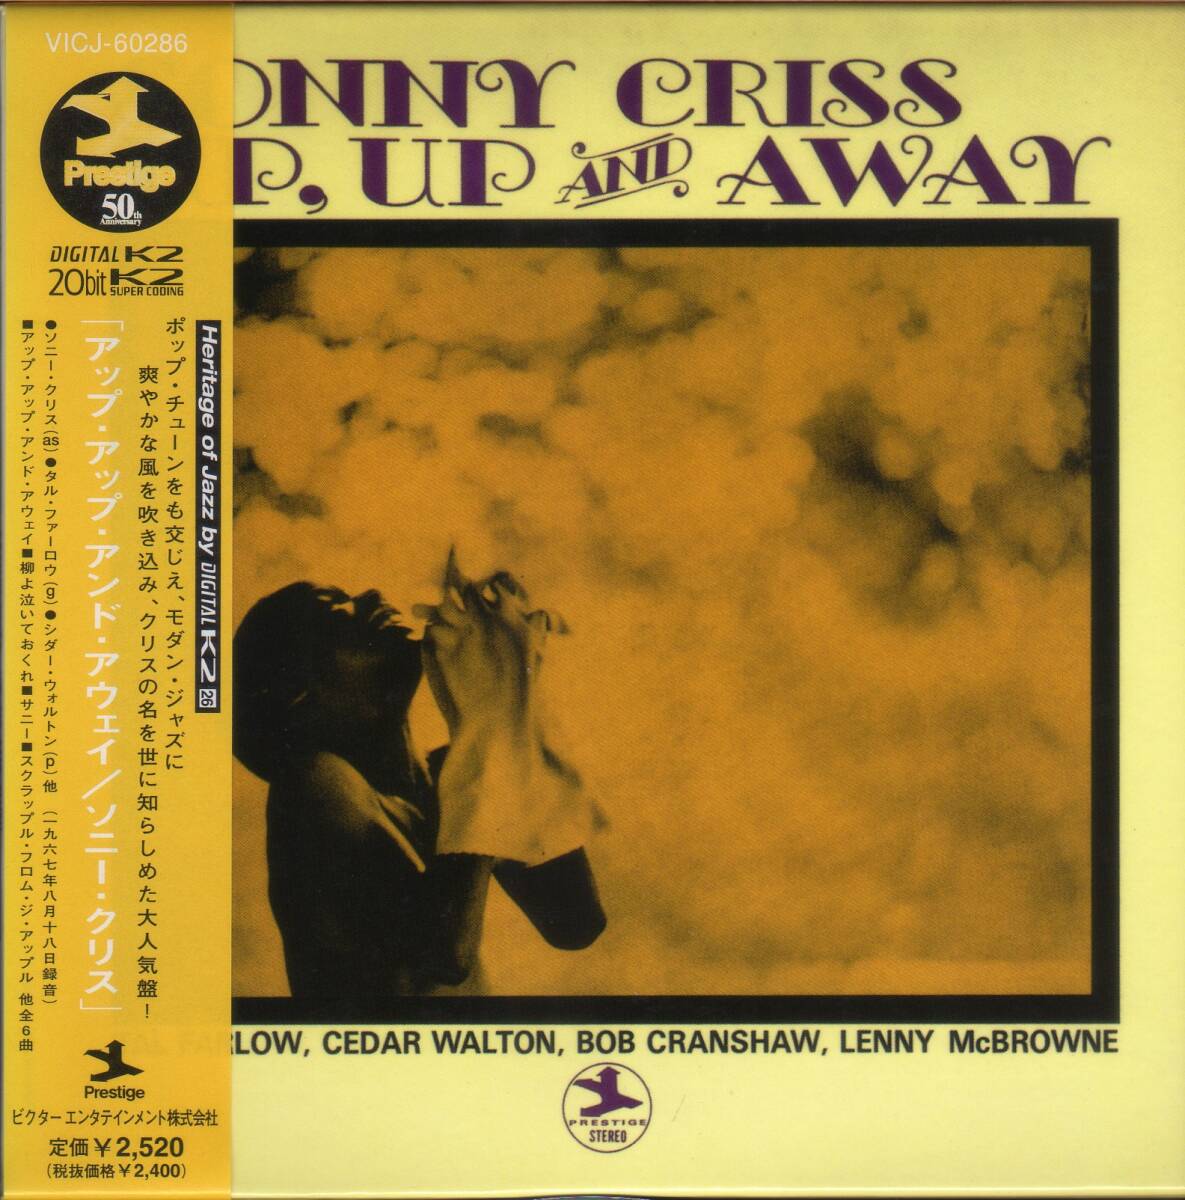 【CD】 ソニー・クリス Sonny Criss  /  Up, Up And Away  紙ジャケ  Digital K2の画像1